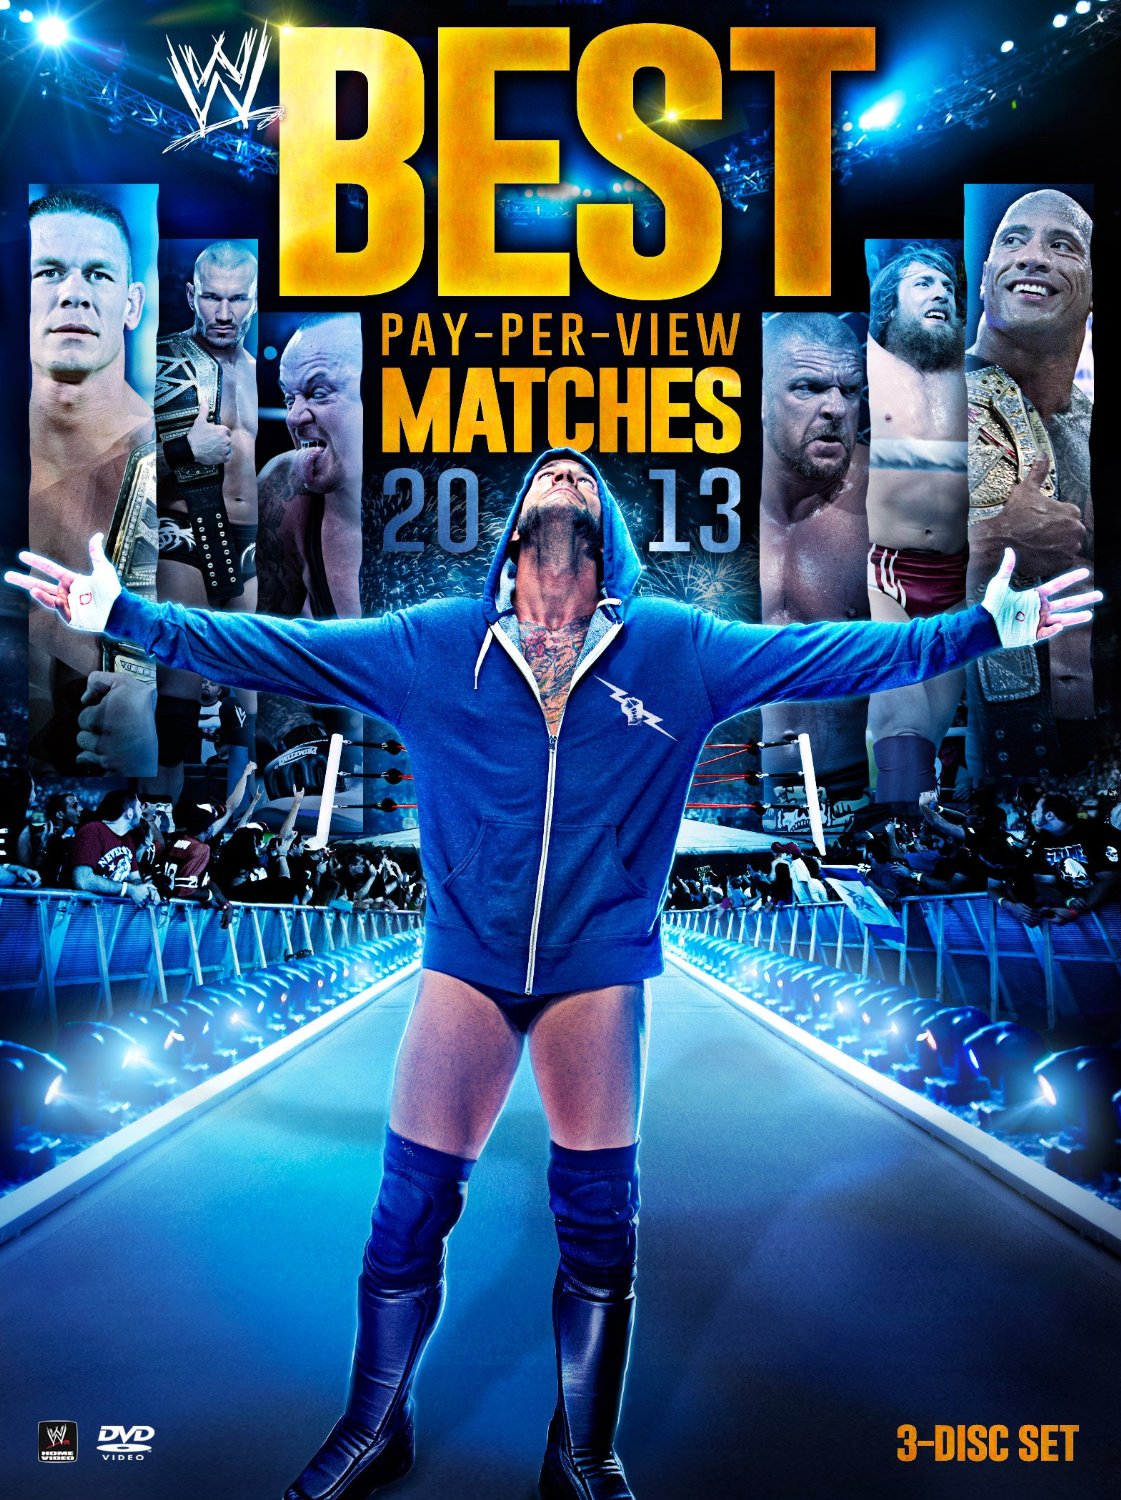 Image WWEBestPayPerViewMatches2013DVDCover.jpg Pro